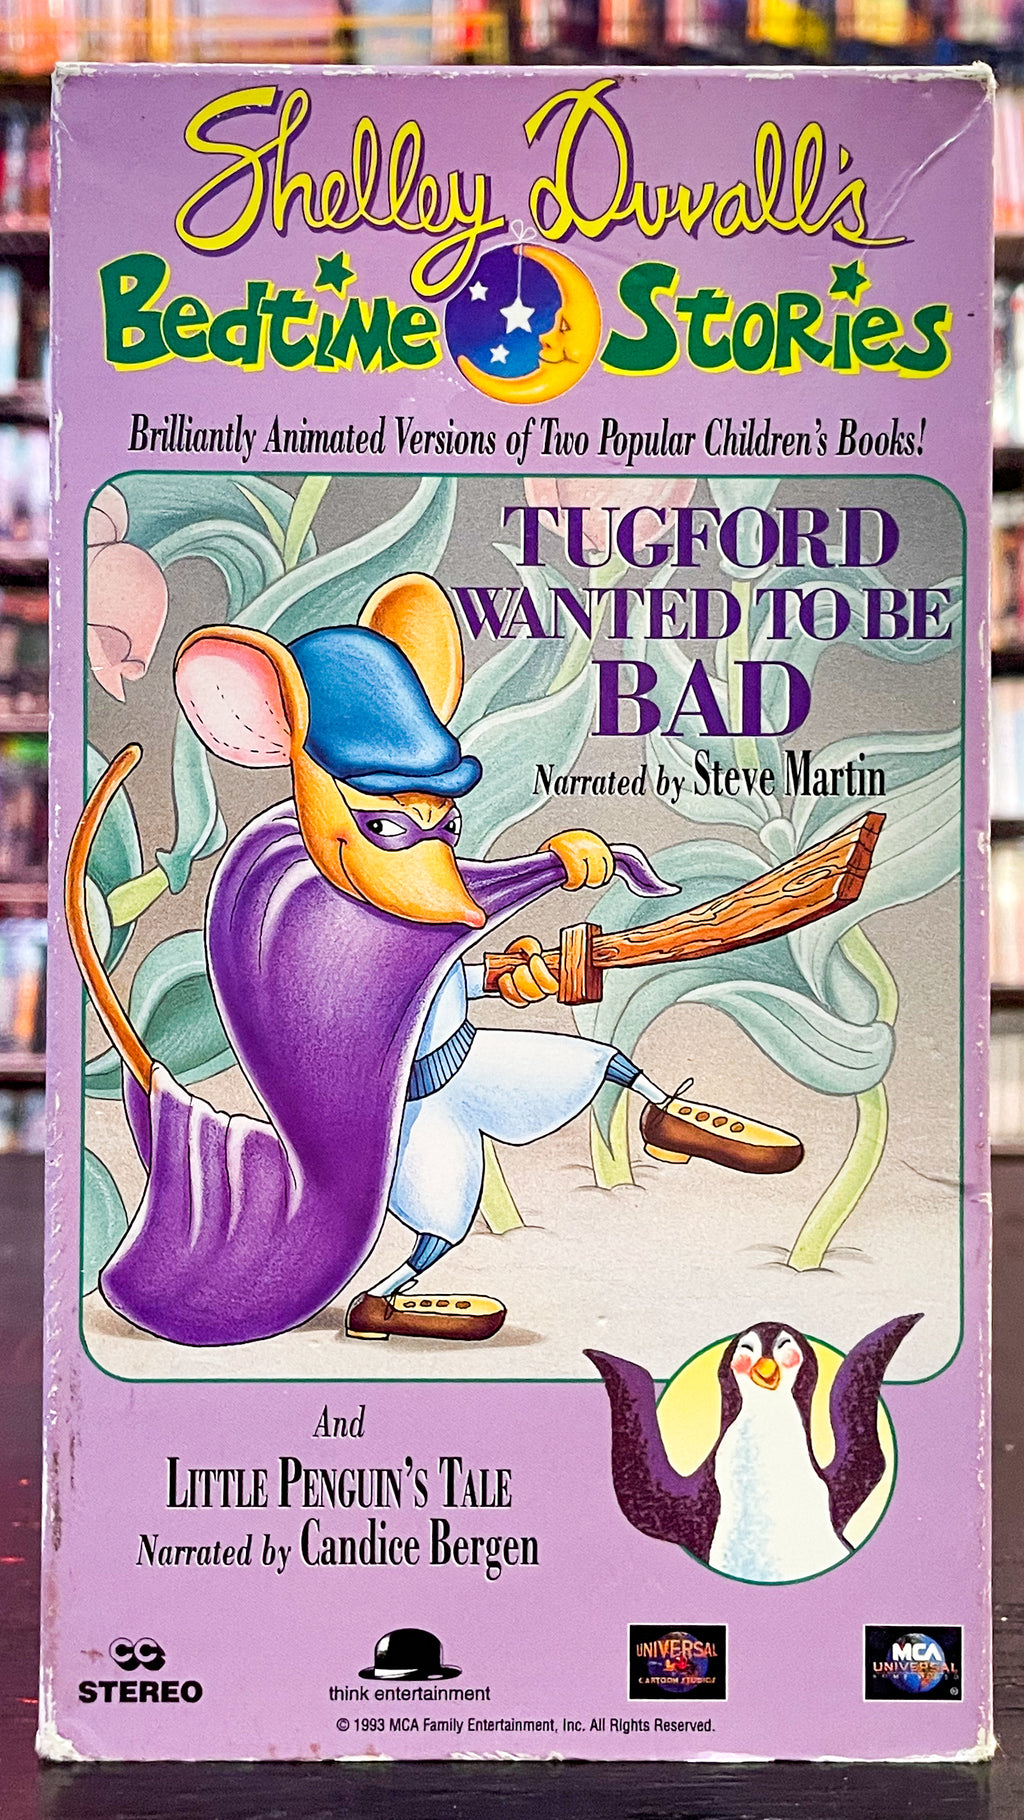 Shelley Duvall's Bedtime Stories: Tugford Wanted to Be Bad/Little Penguin's Tale